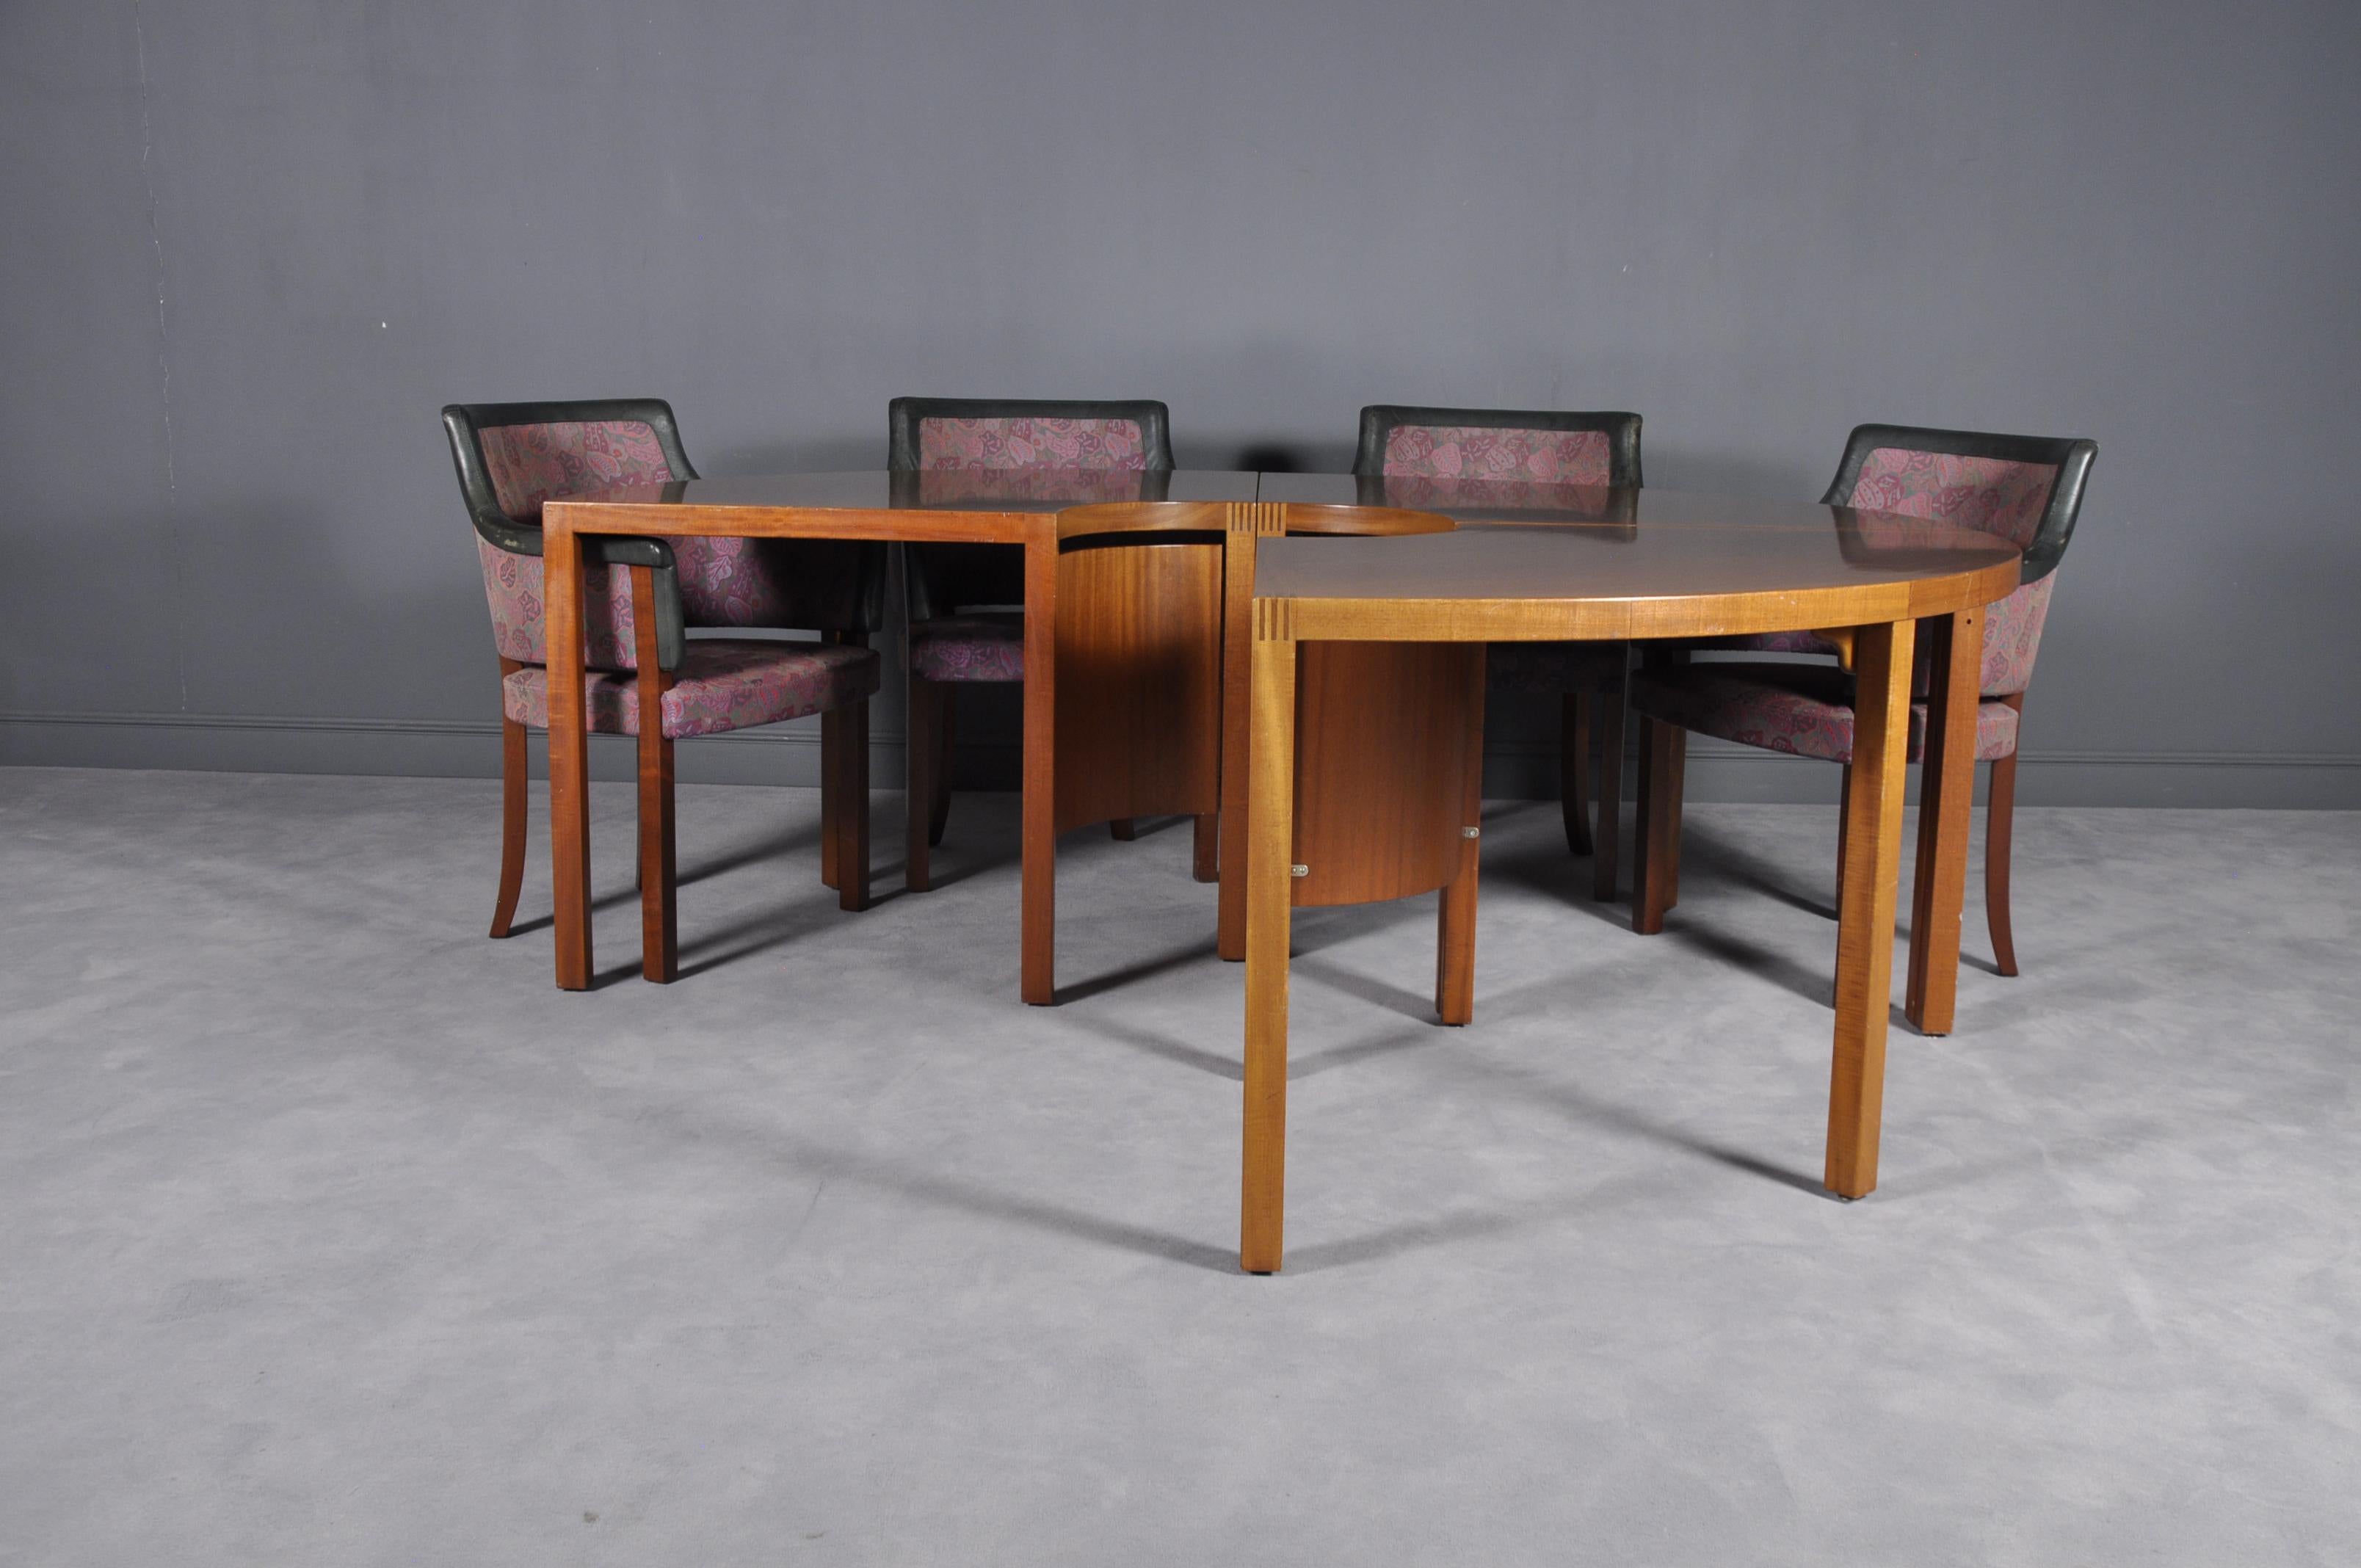 Scandinavian Modern Conference Table and Eight “Riksdagen” Chairs by Åke Axelsson for Gärsnäs, 1981 For Sale